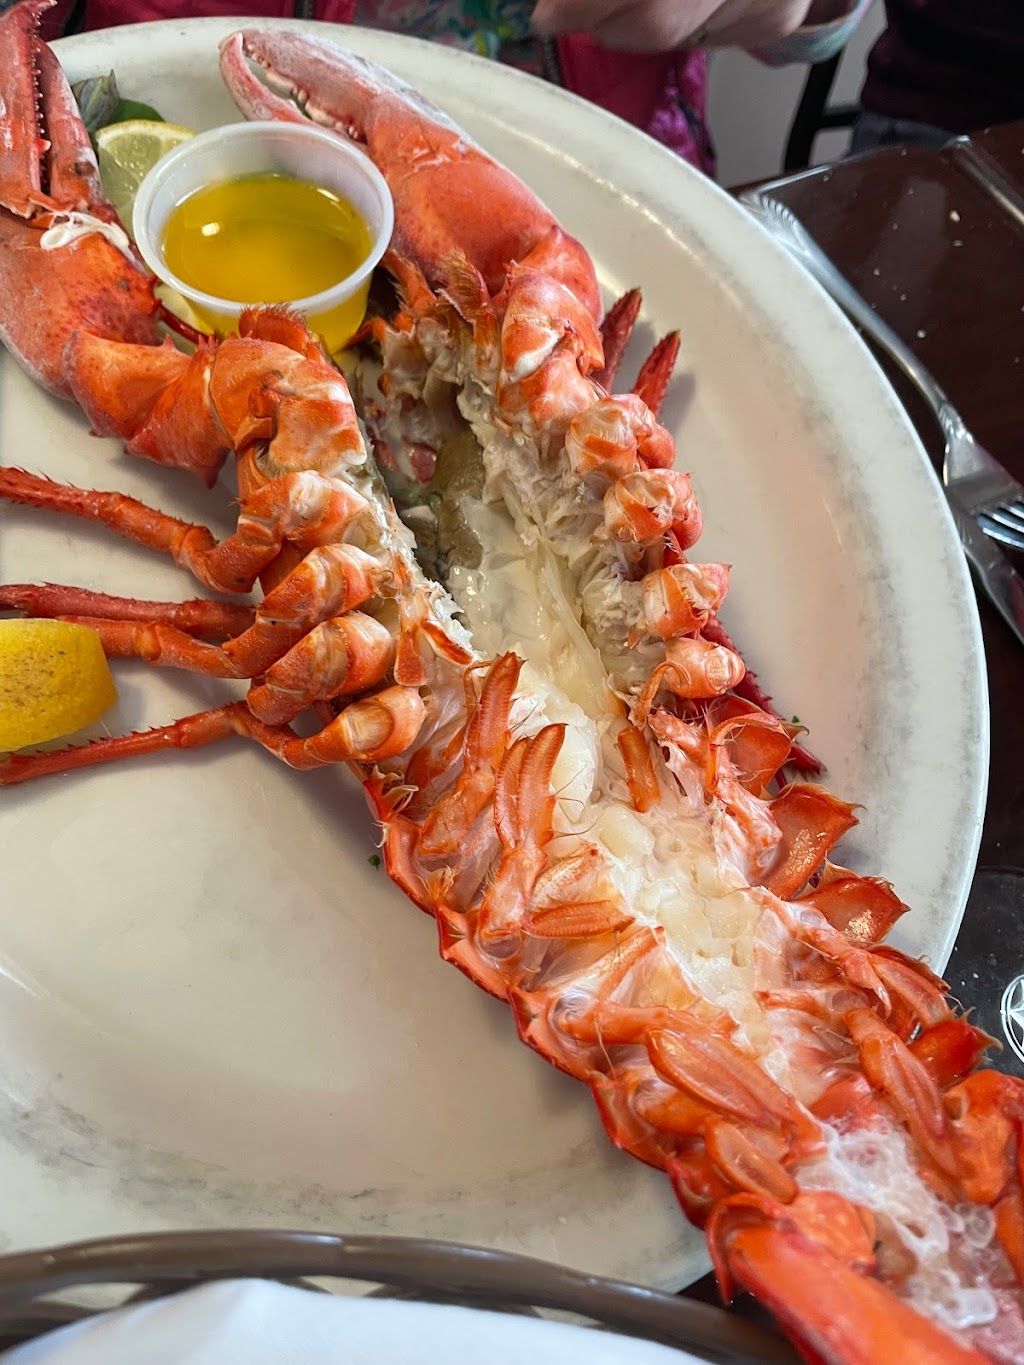 Gregorys Restaurant & Bar | 900 Shore Rd, Somers Point, NJ 08244 | Phone: (609) 927-6665